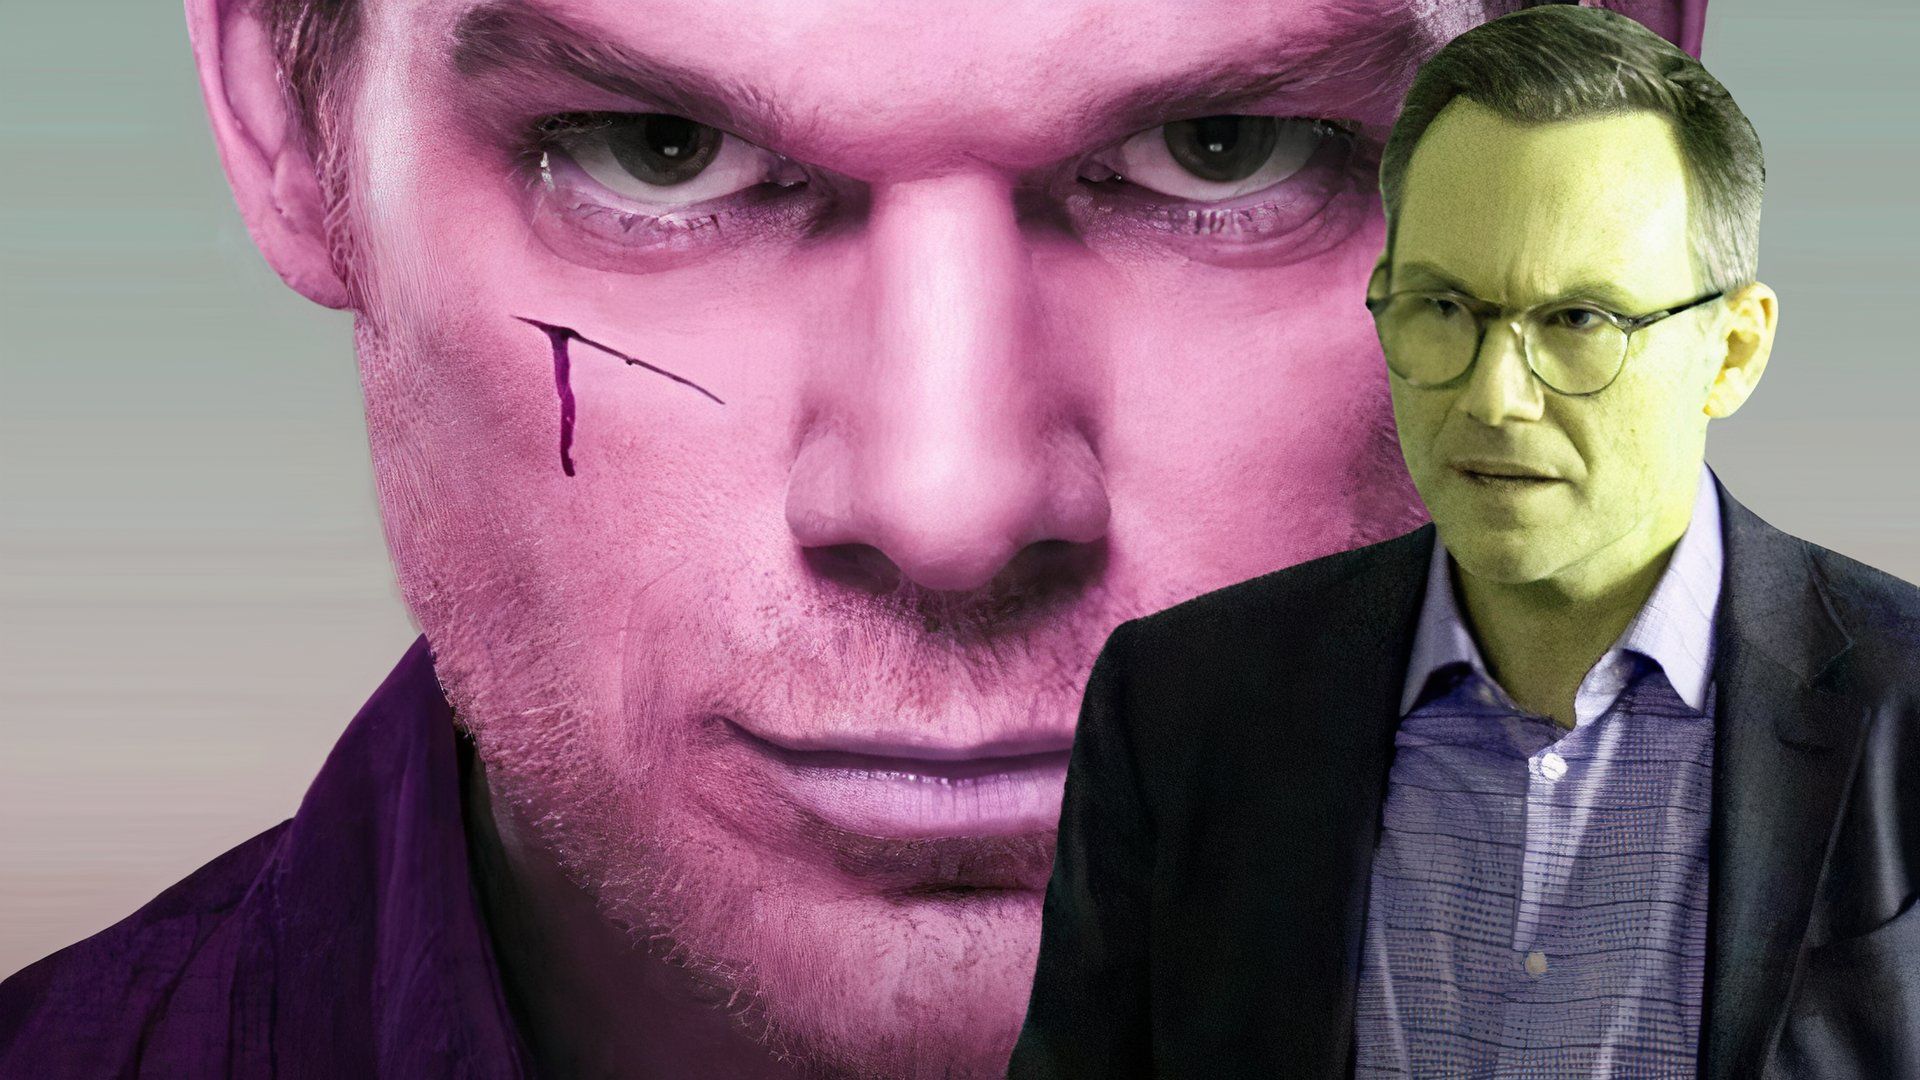 Michael C. Hall in Dexter and Christian Slater in Dr. Death